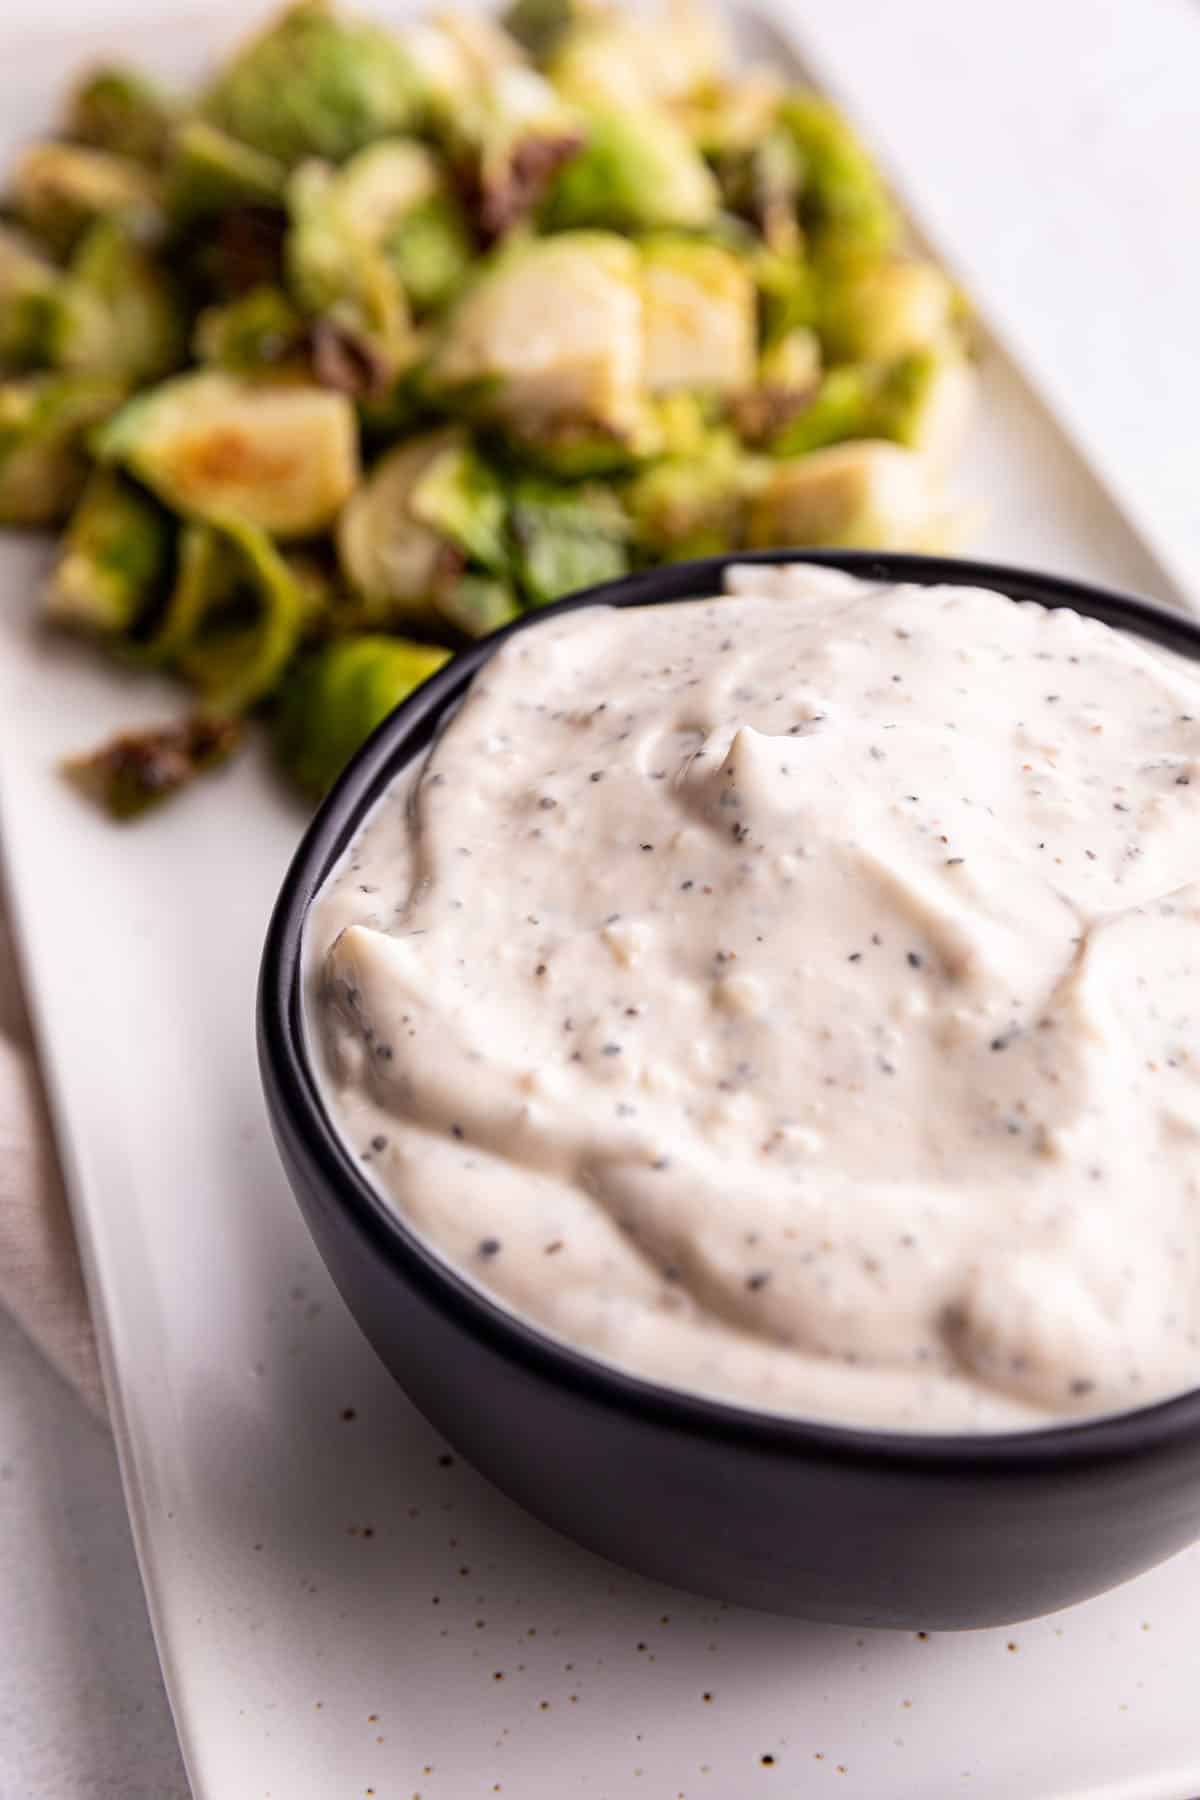 A black bowl full of a white sauce with roasted brussels sprouts.